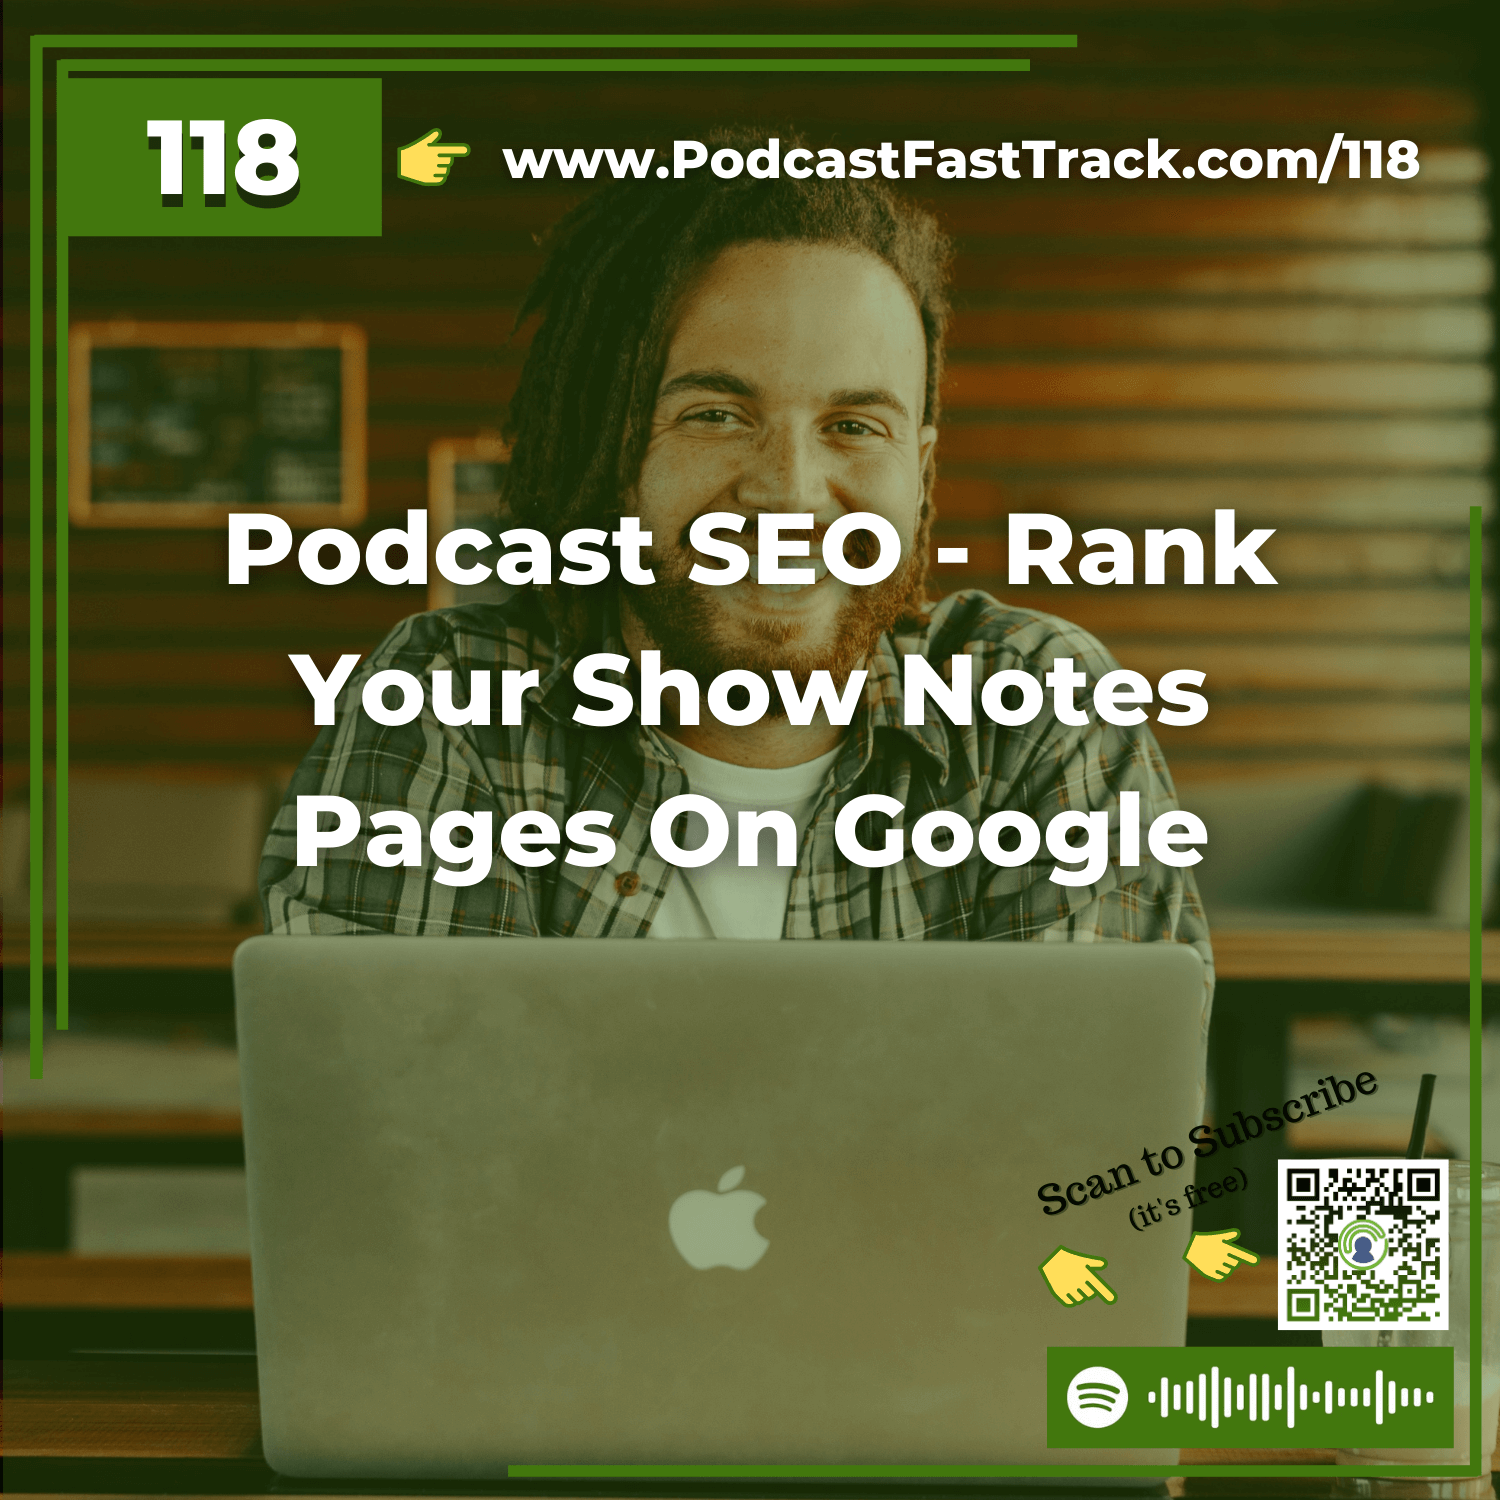 118: Podcast SEO – How To Rank Your Show Notes Pages On Google